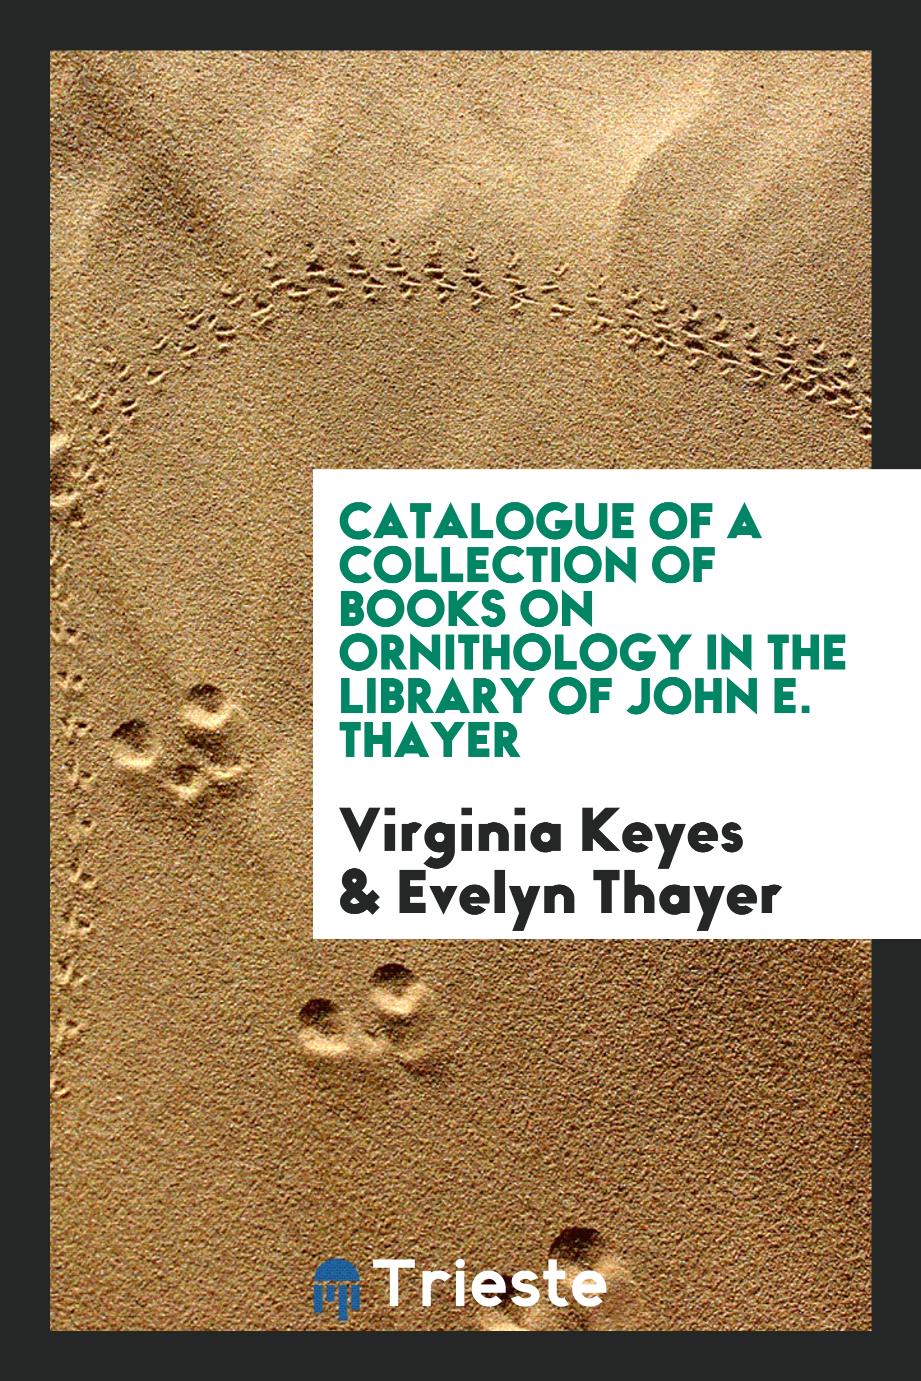 Catalogue of a collection of books on ornithology in the library of John E. Thayer